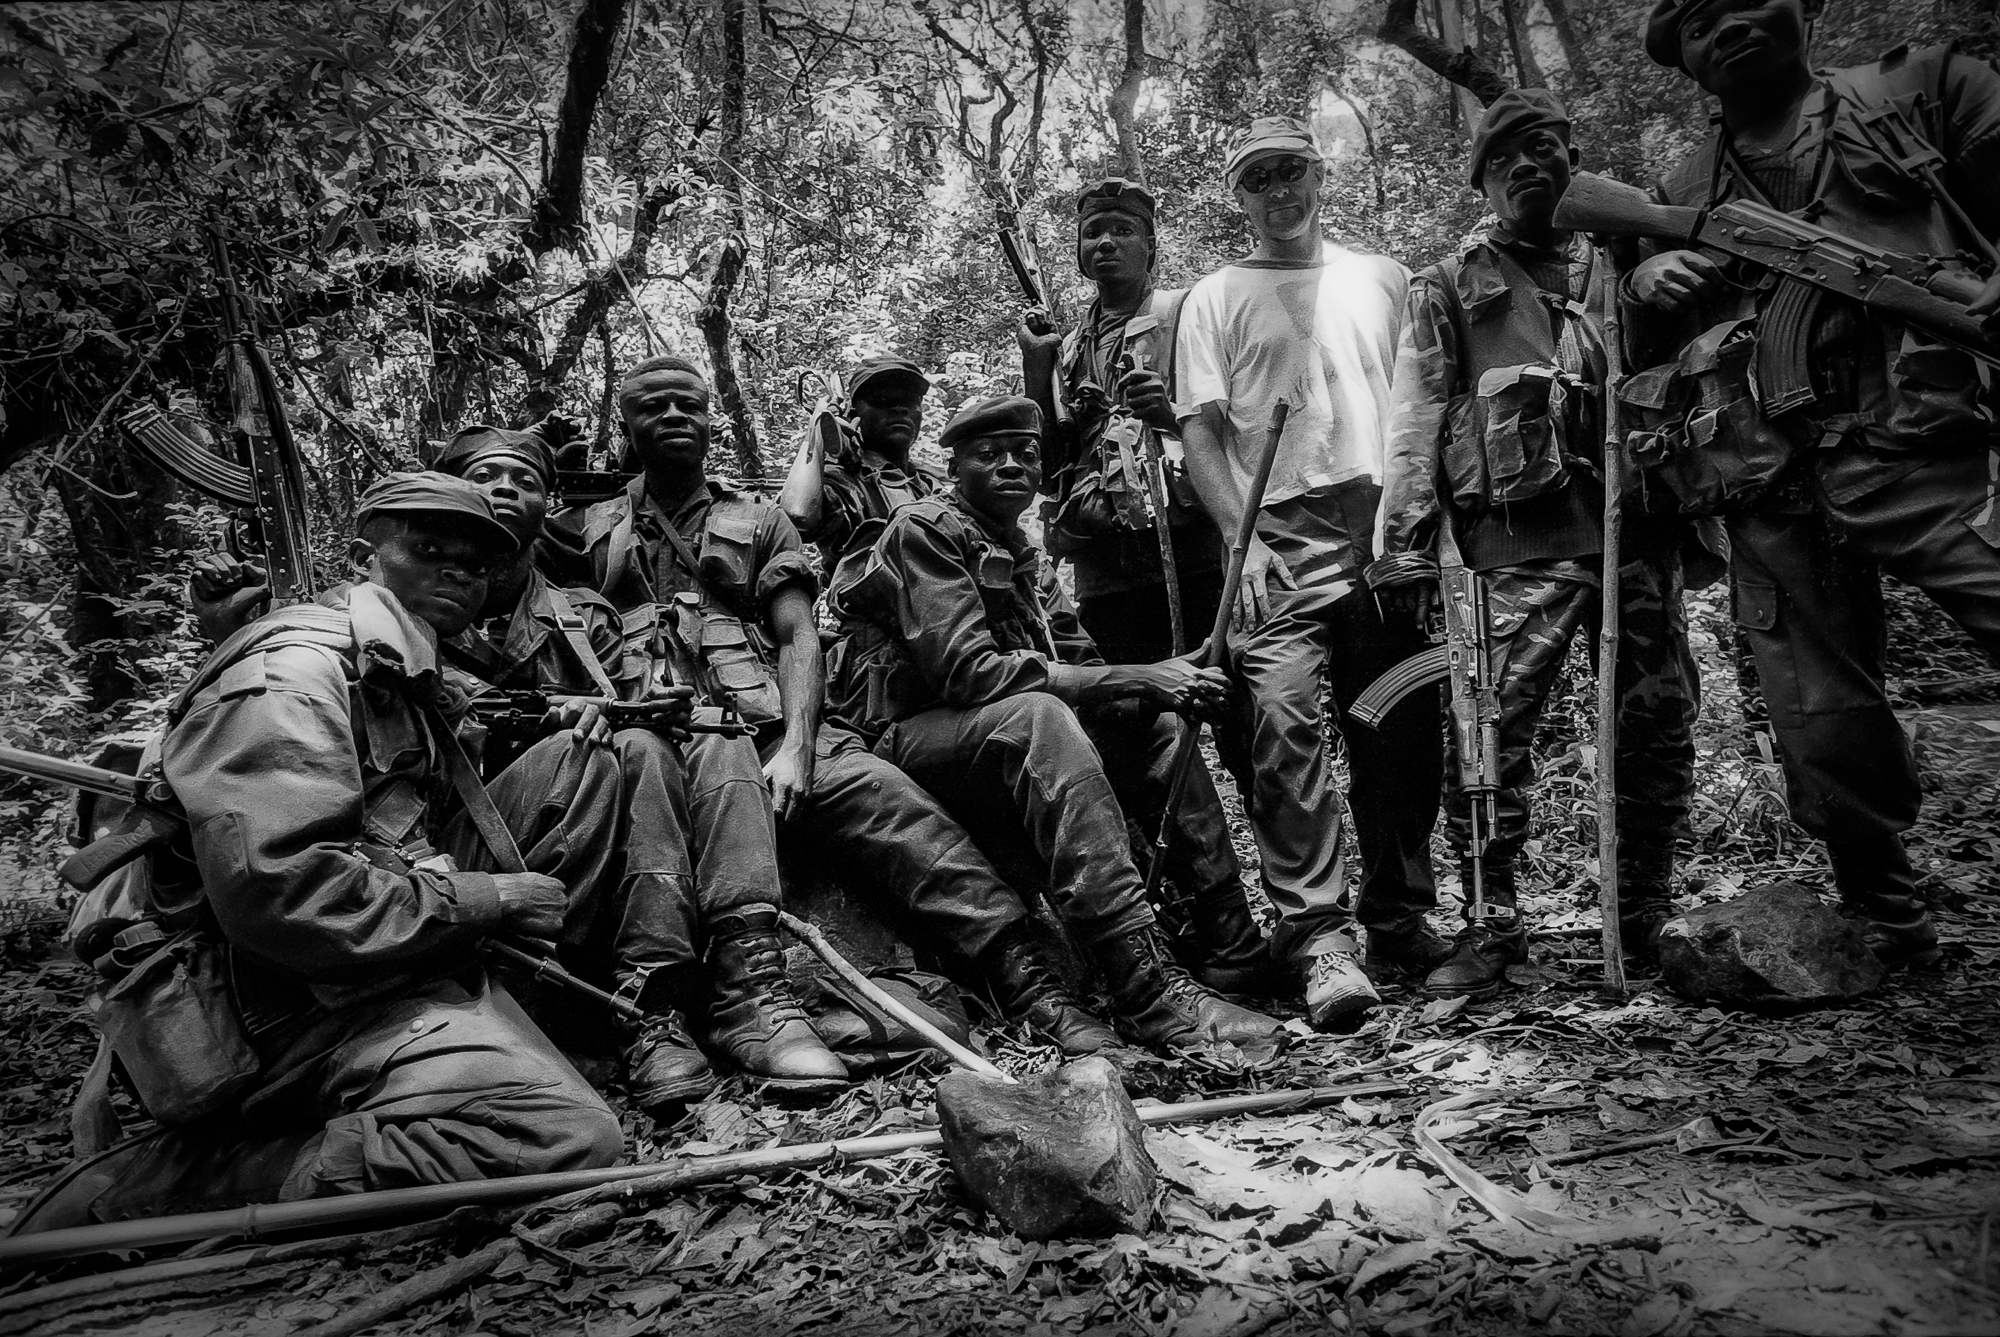 The speaker on a three day active mission in the Kahuzi Beiga National Park with soldiers of the first "integrated" brigade of the Forces of the Democratic Republic of Congo (FARDC)